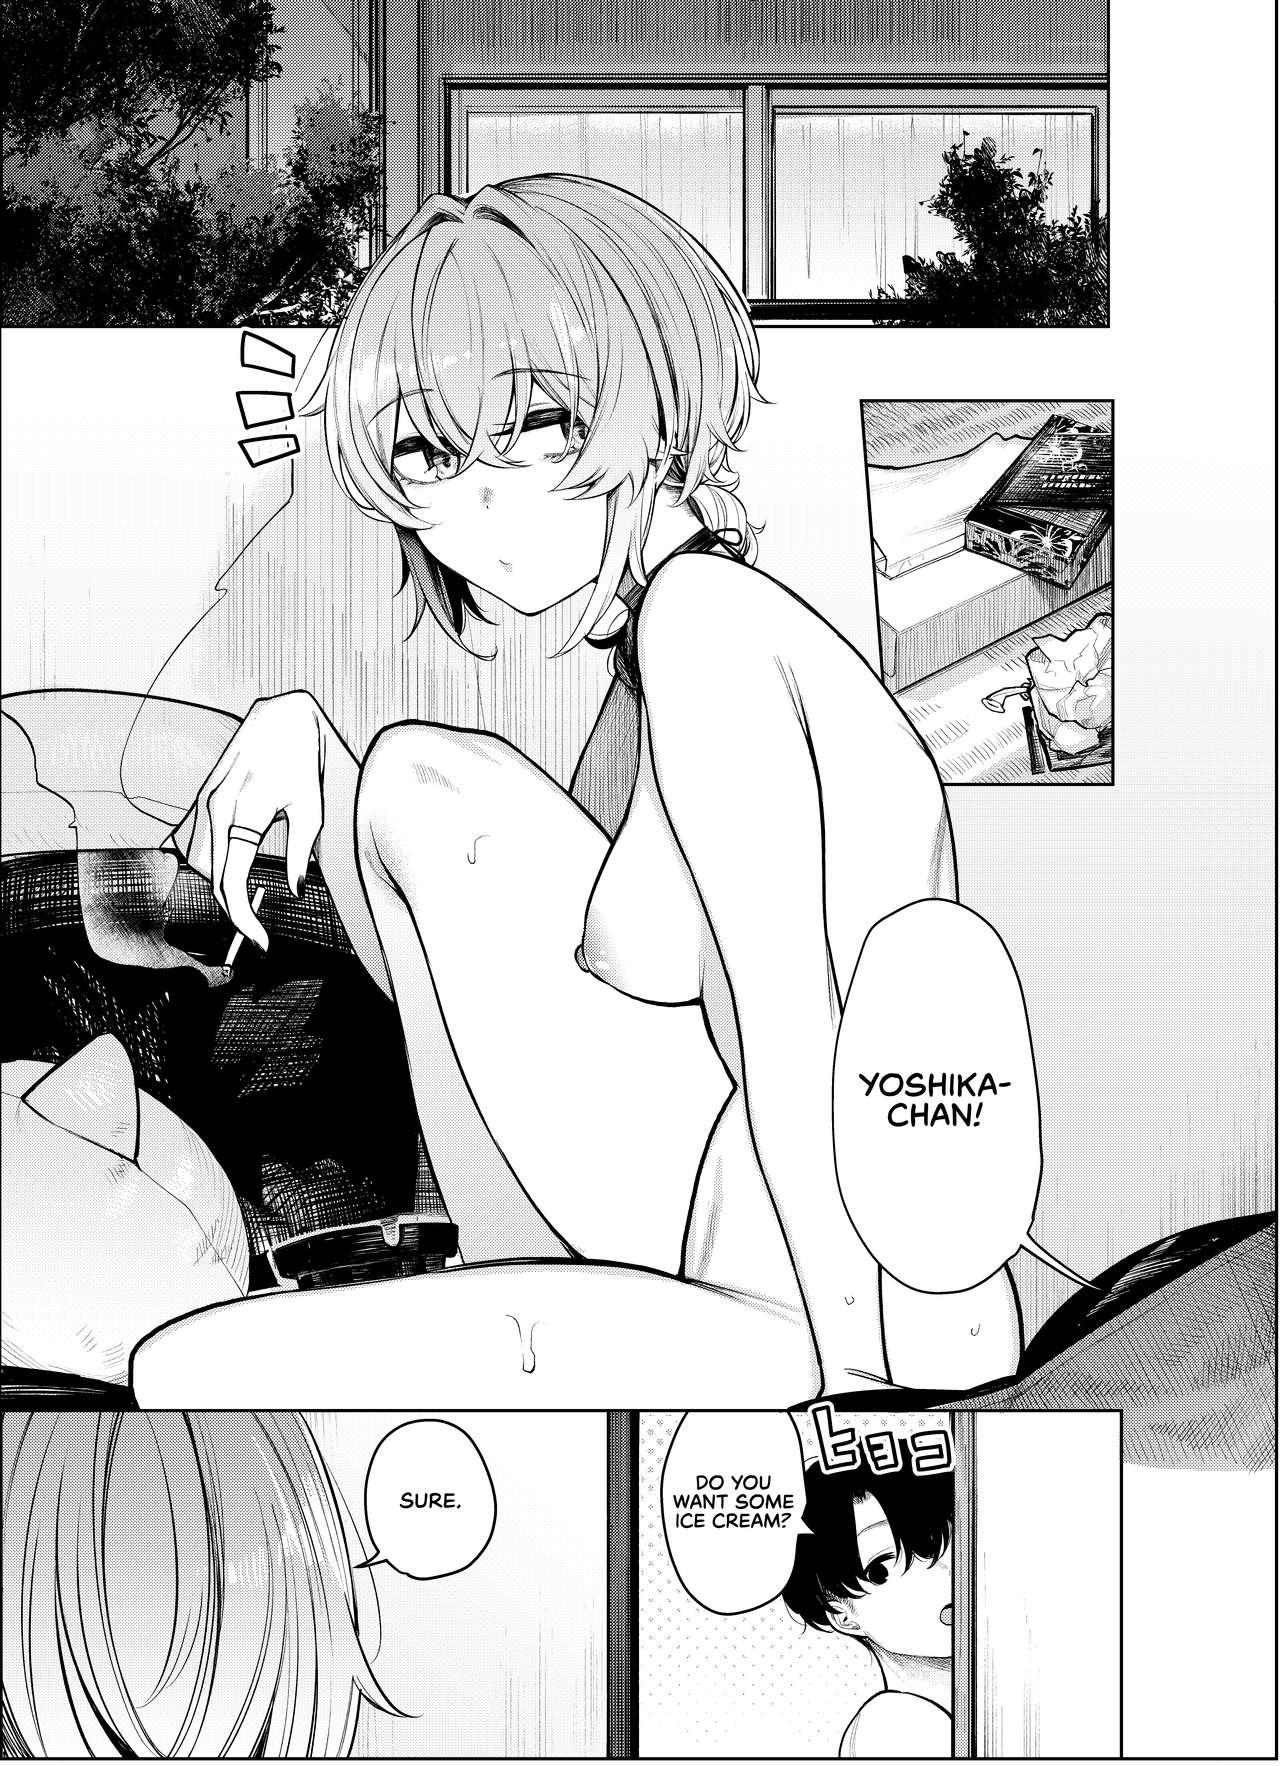 Viet Nam Furyouppoi Kanojo to Daradara Omocha de Mou Ikkai. | Leisurely Playing With Sex Toys With My Delinquent-looking Girlfriend, Yet Again. - Original Behind - Page 6